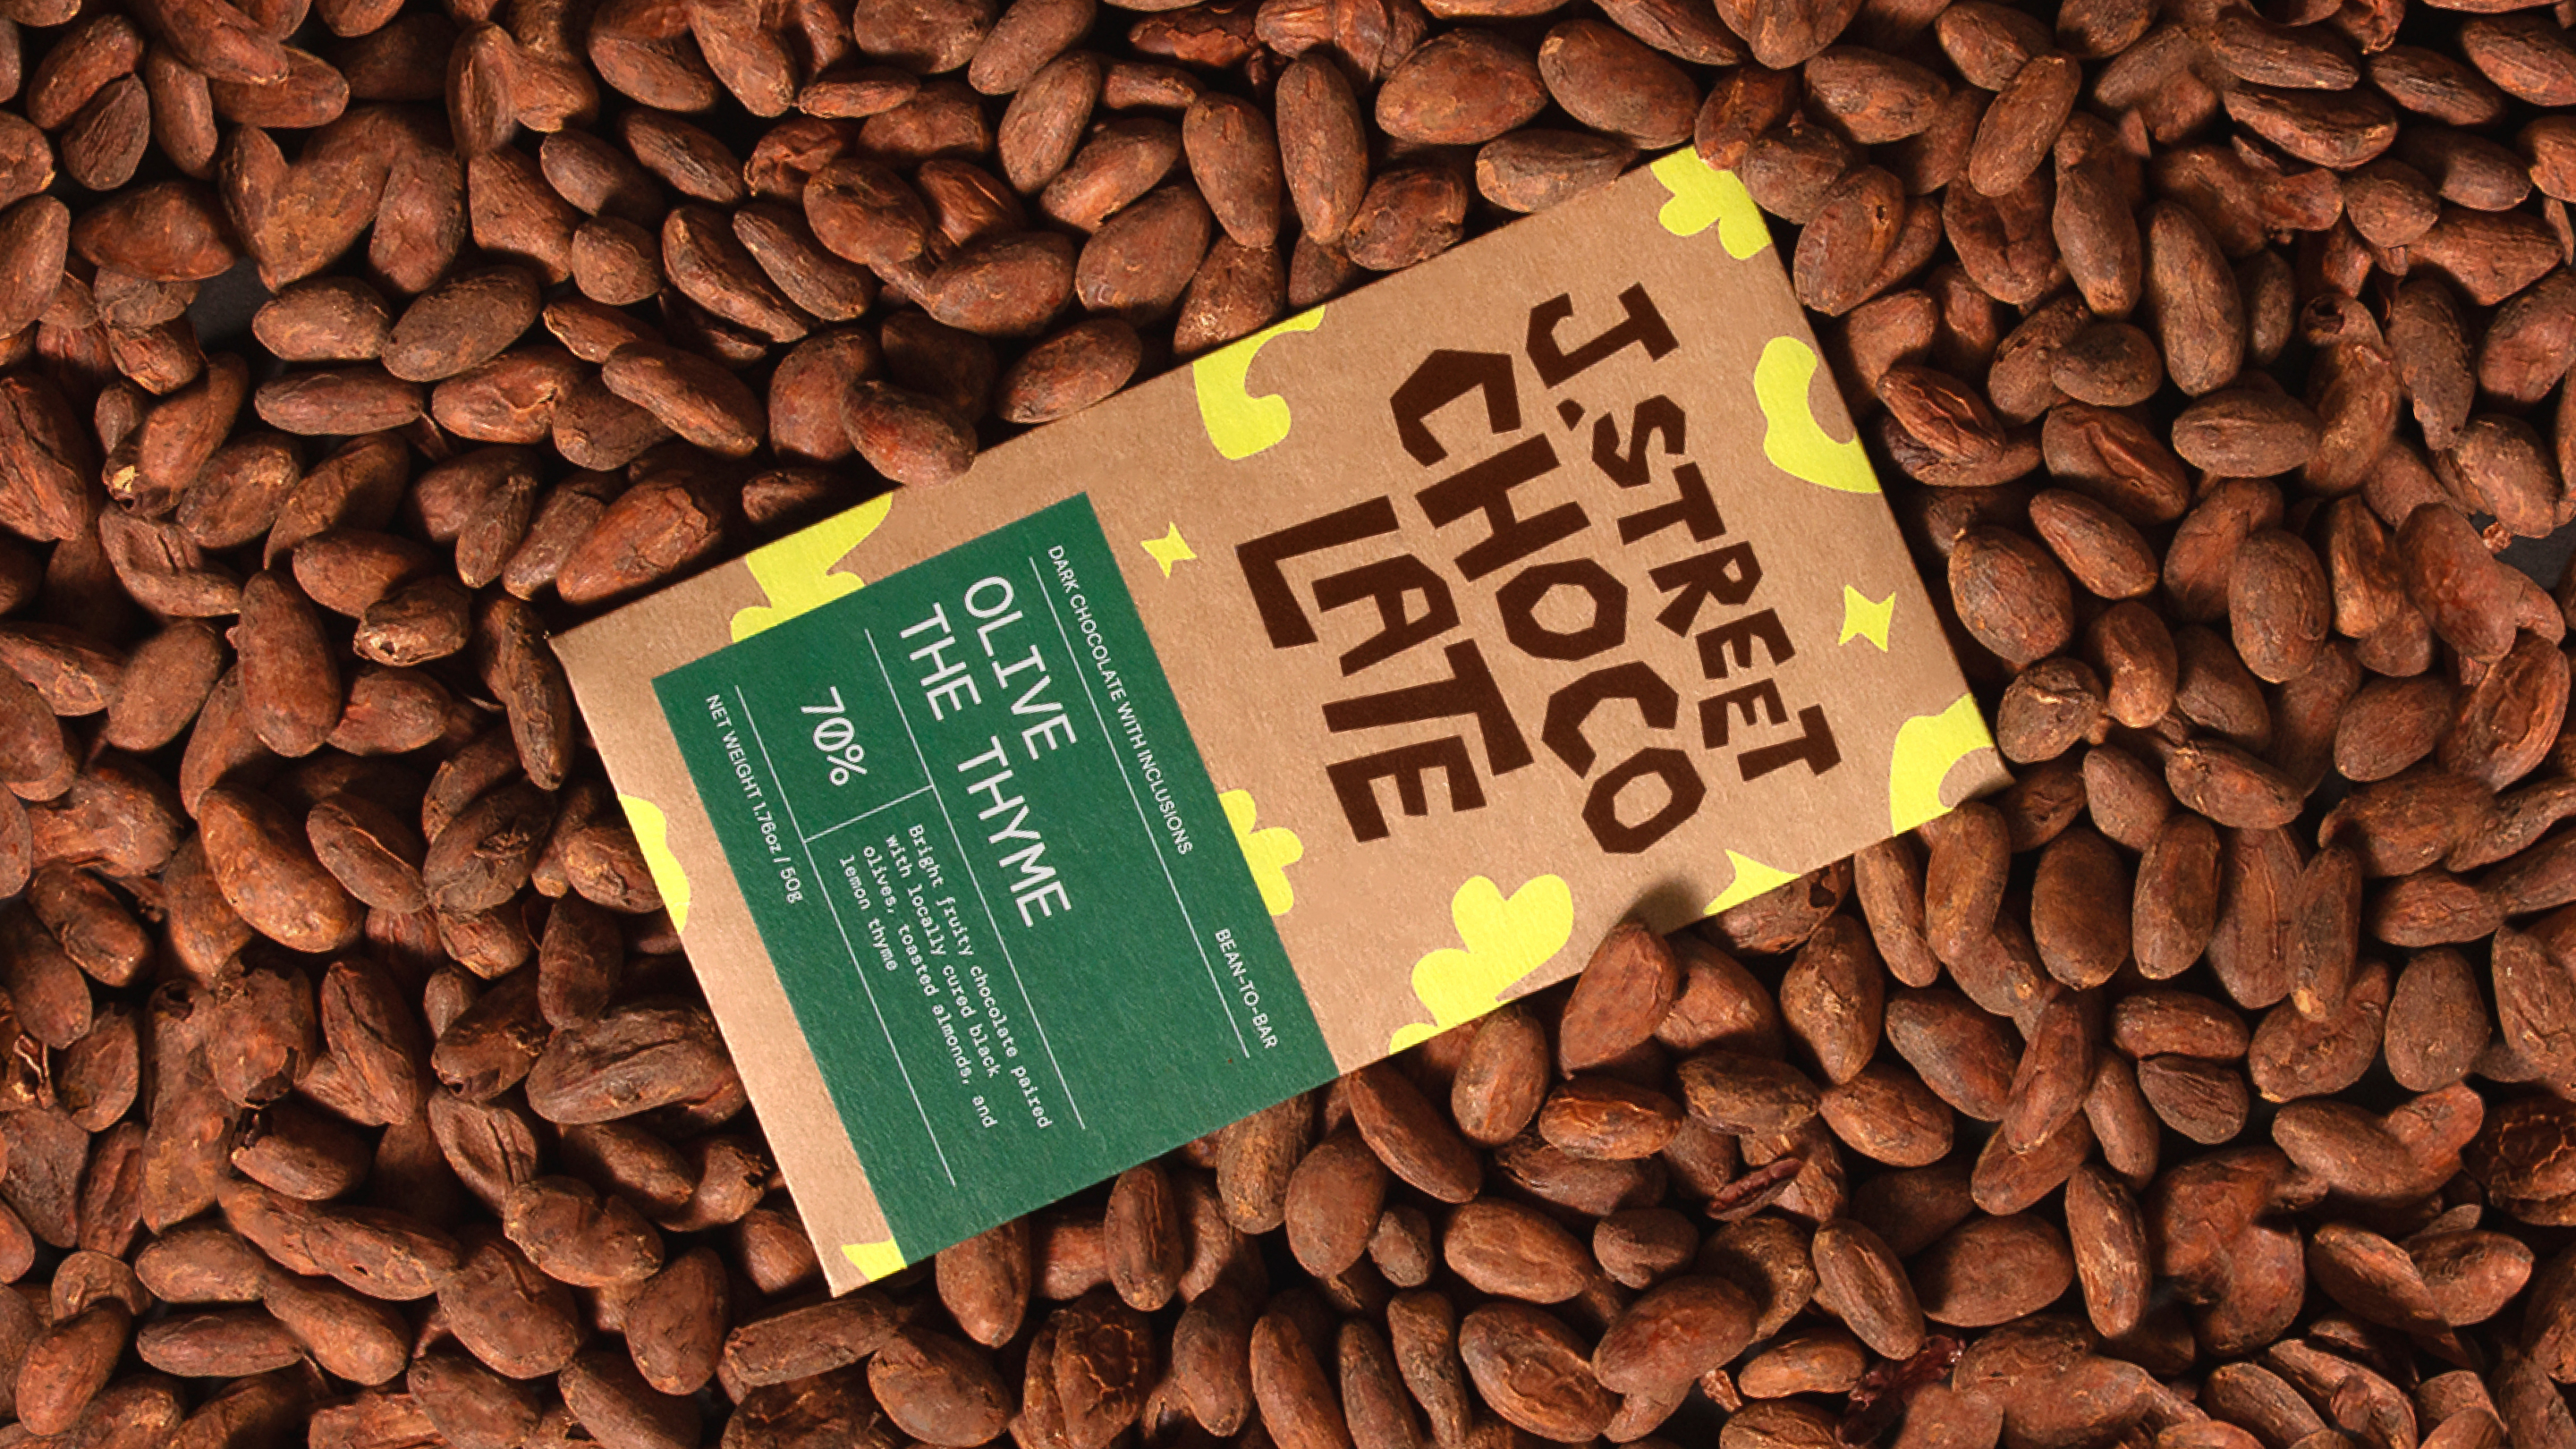 photo of the J. Street Chocolate packaging for Olive the Thyme flavor